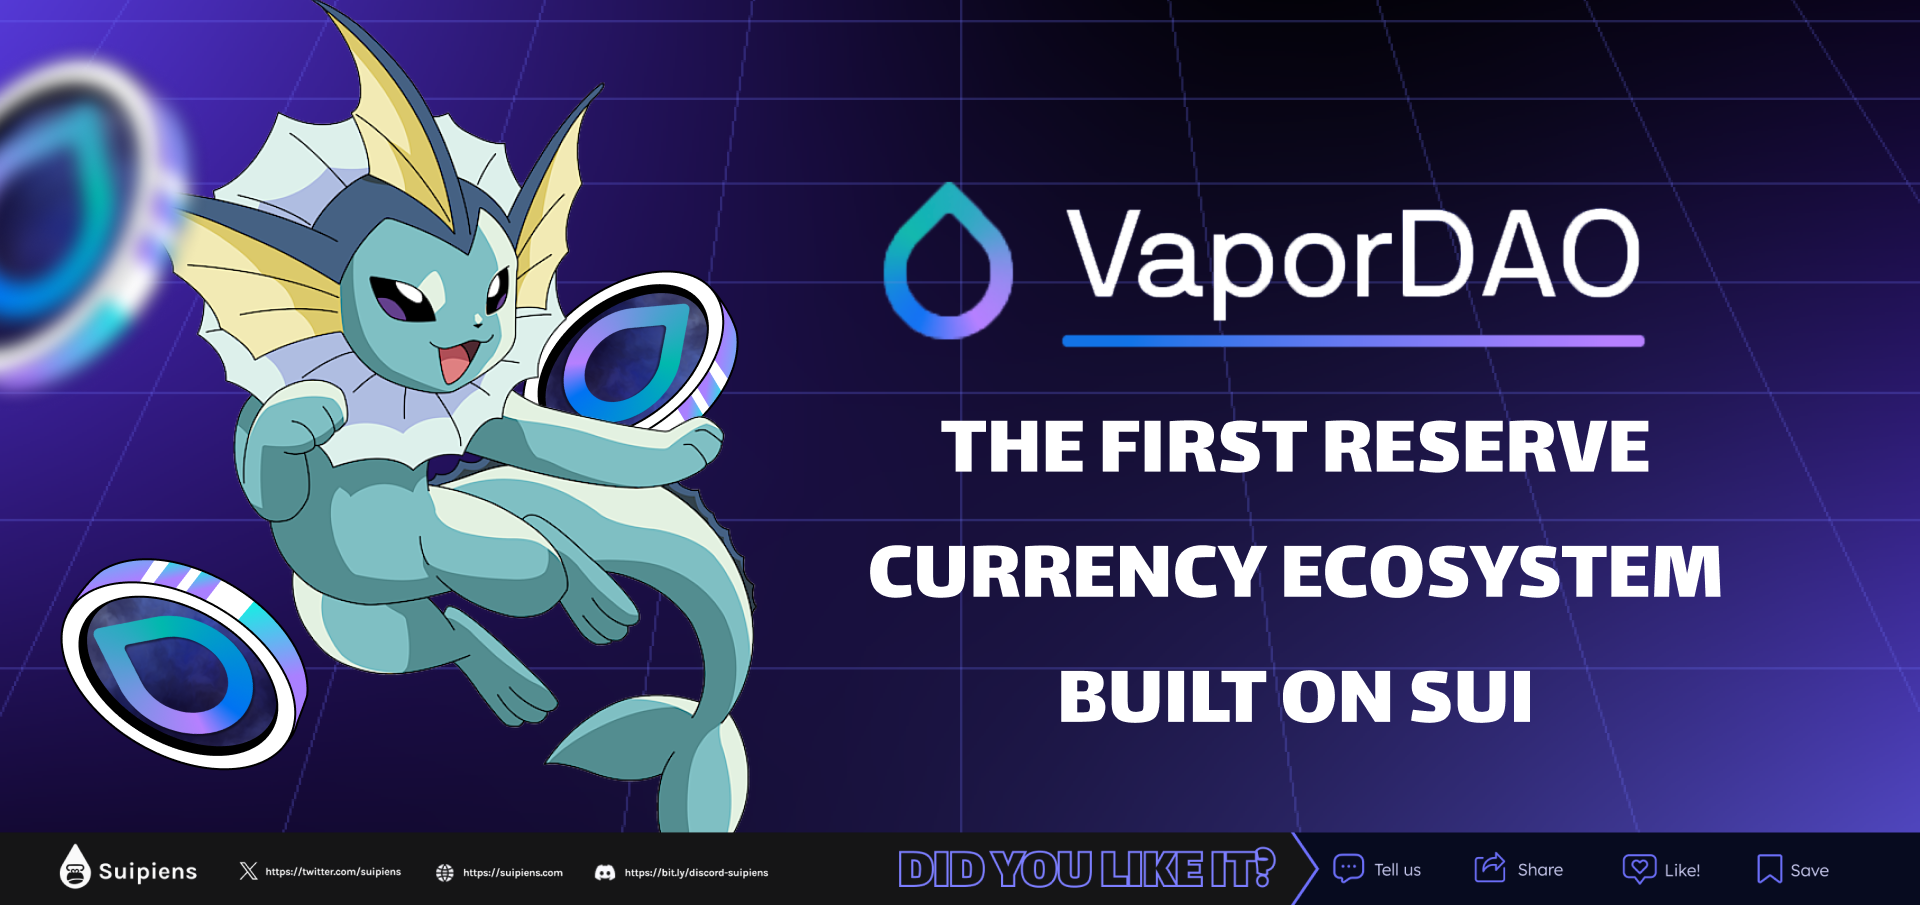 Vapor DAO - The first Reserve Currency Ecosystem built on Sui